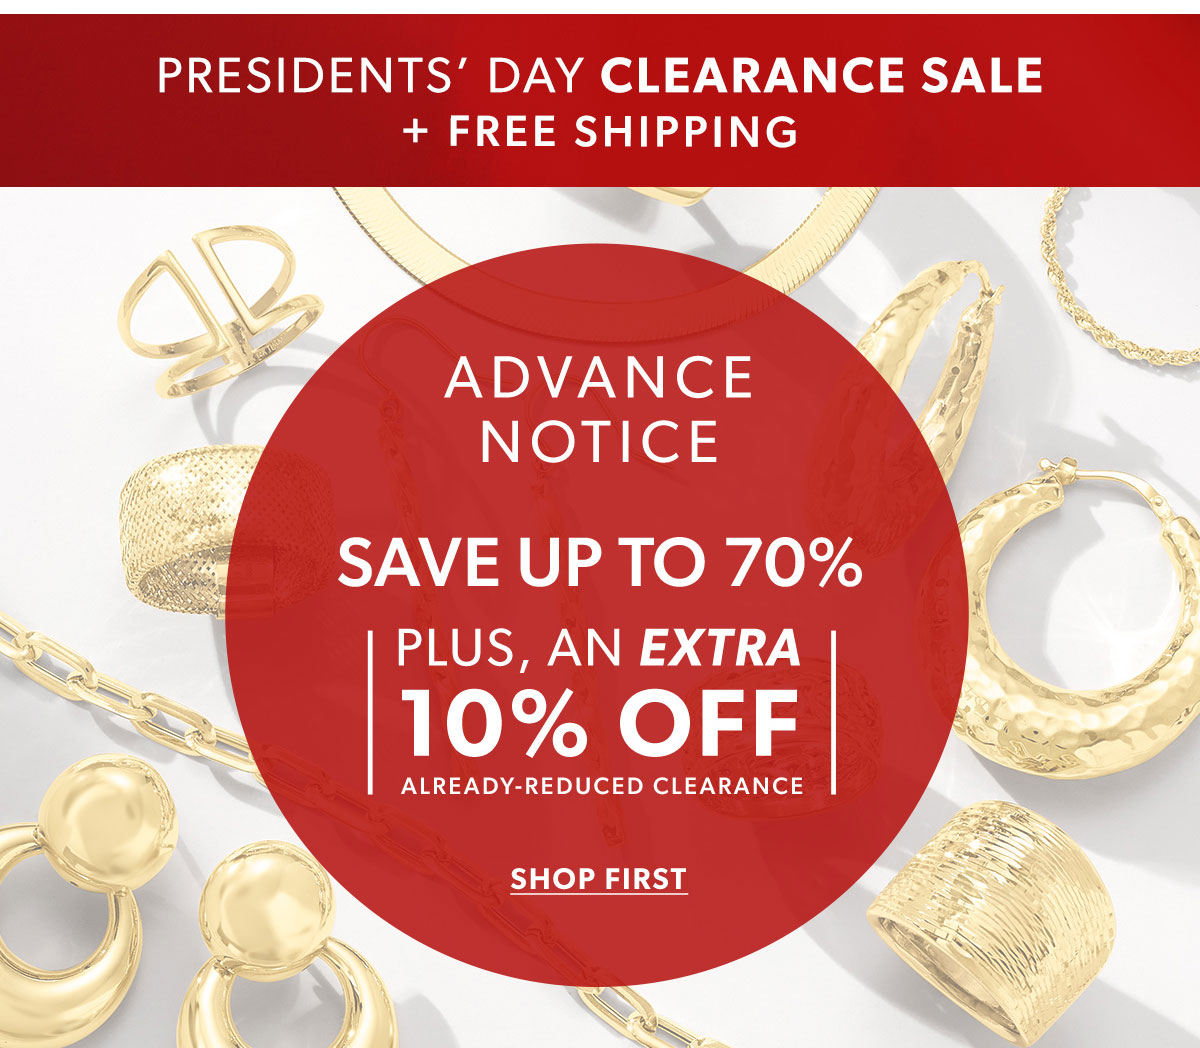 Advanced Notice. Save Up To 70% Plus, An Extra 10% Off Already-Reduced Clearance